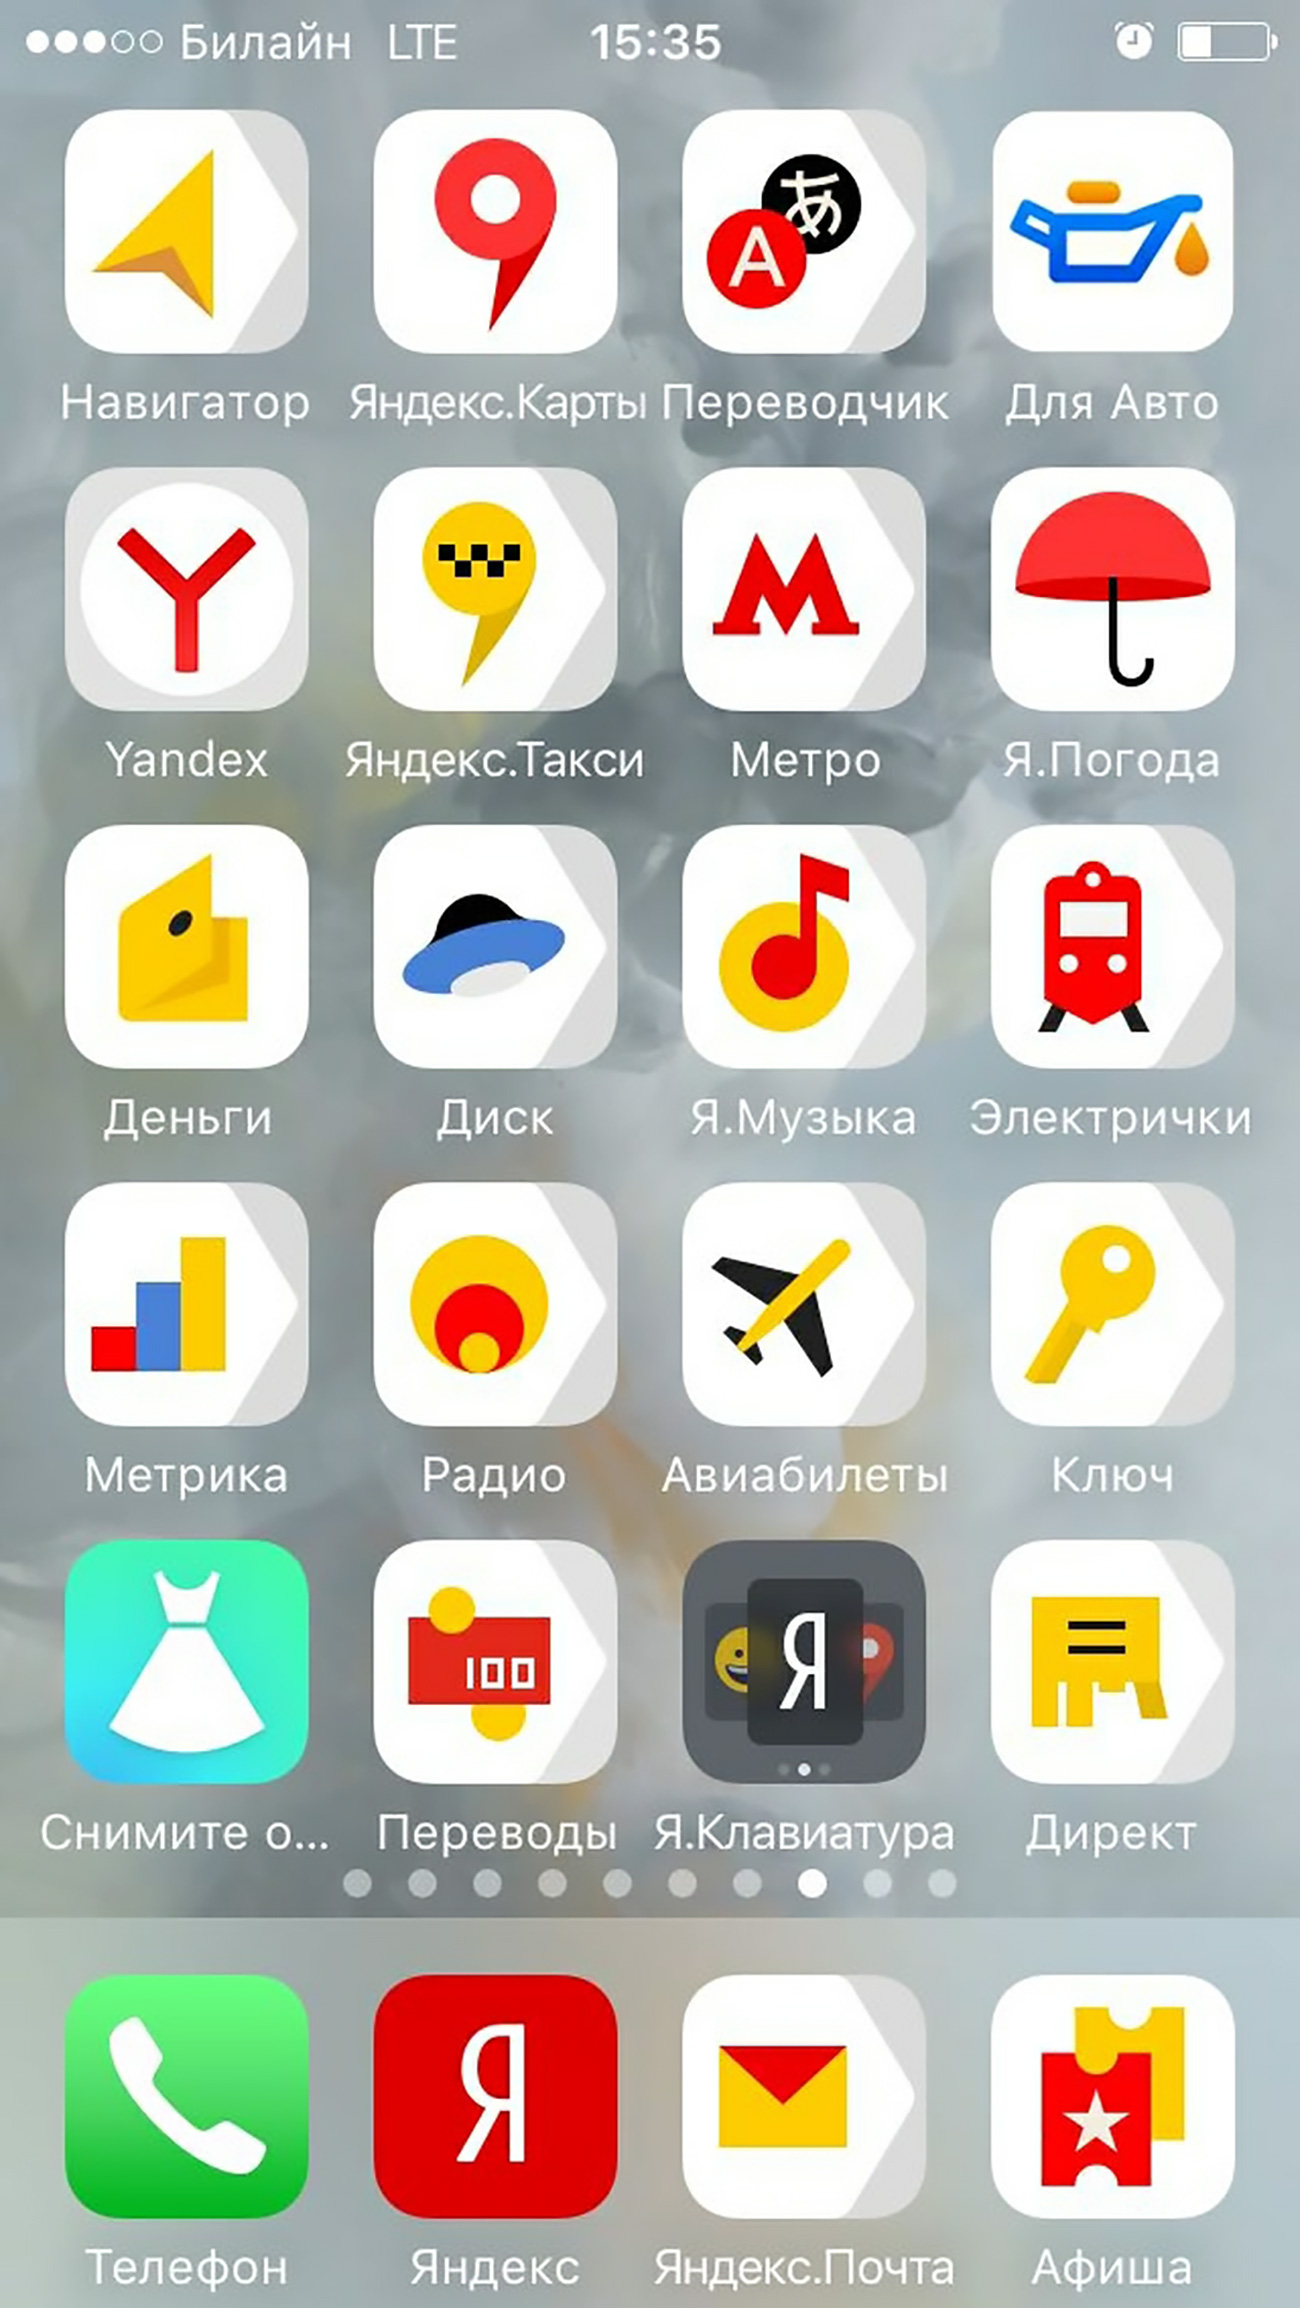 Mobile apps of Russian-based web business companies banned by President of Ukraine Petro Poroshenko under new sanctions against Russia. In picture: Yandex mobile apps. / Photo: Global Look Press